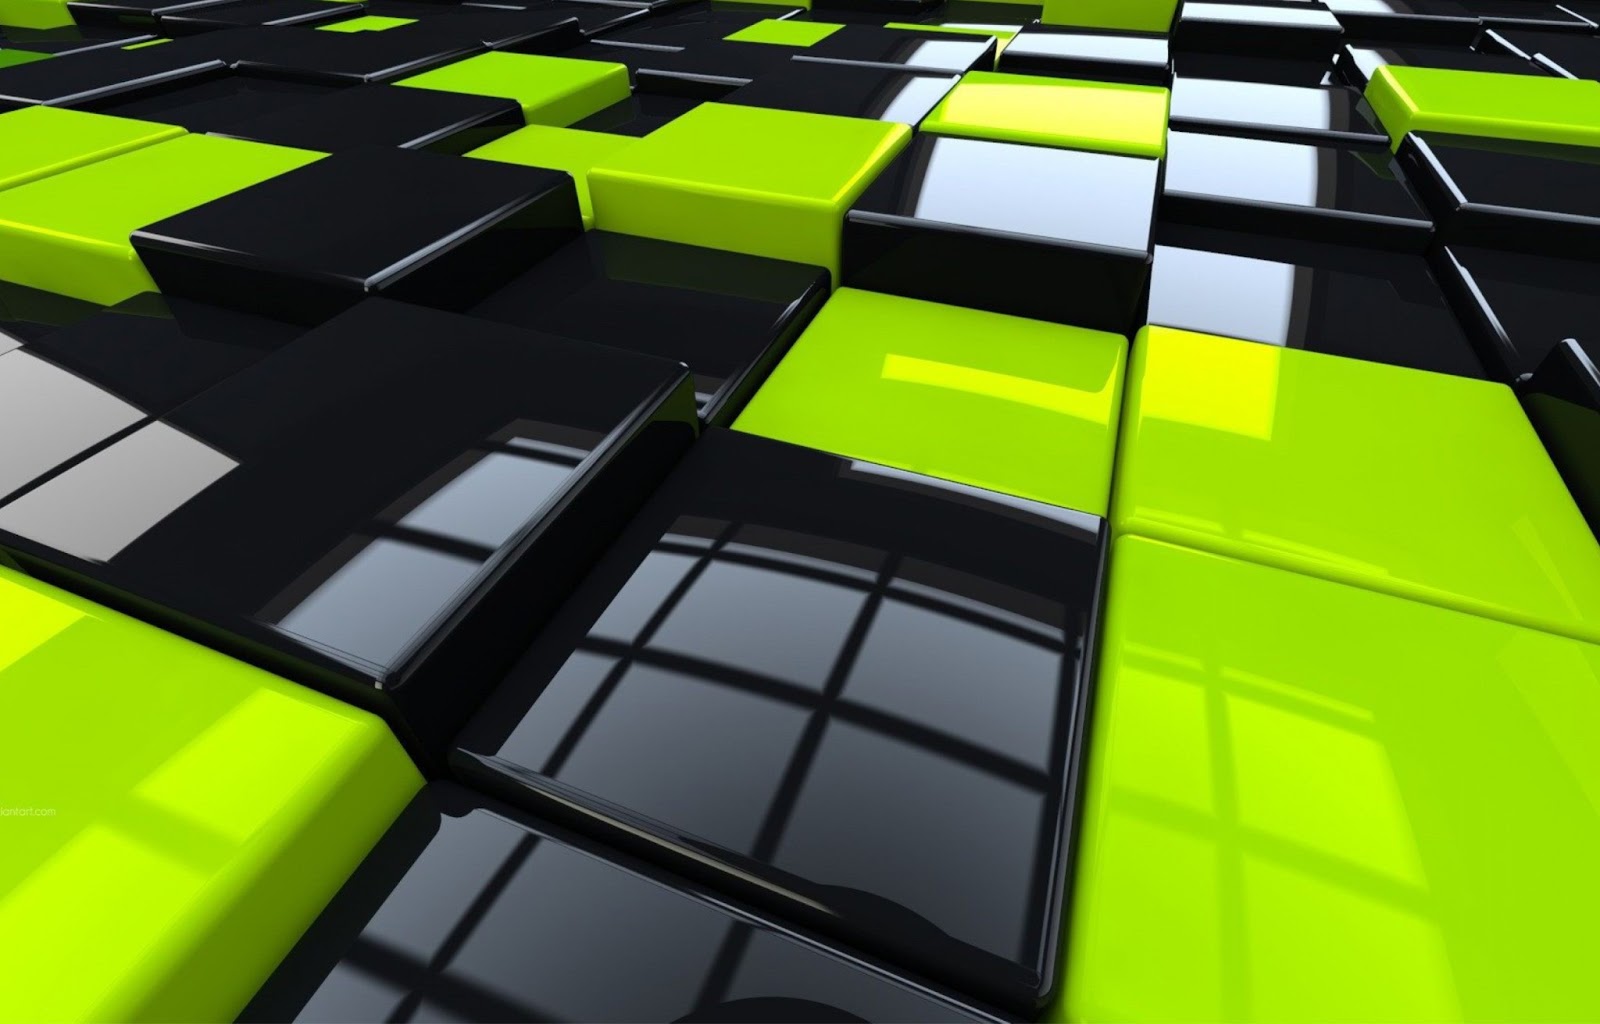 block wallpaper,green,yellow,architecture,colorfulness,games